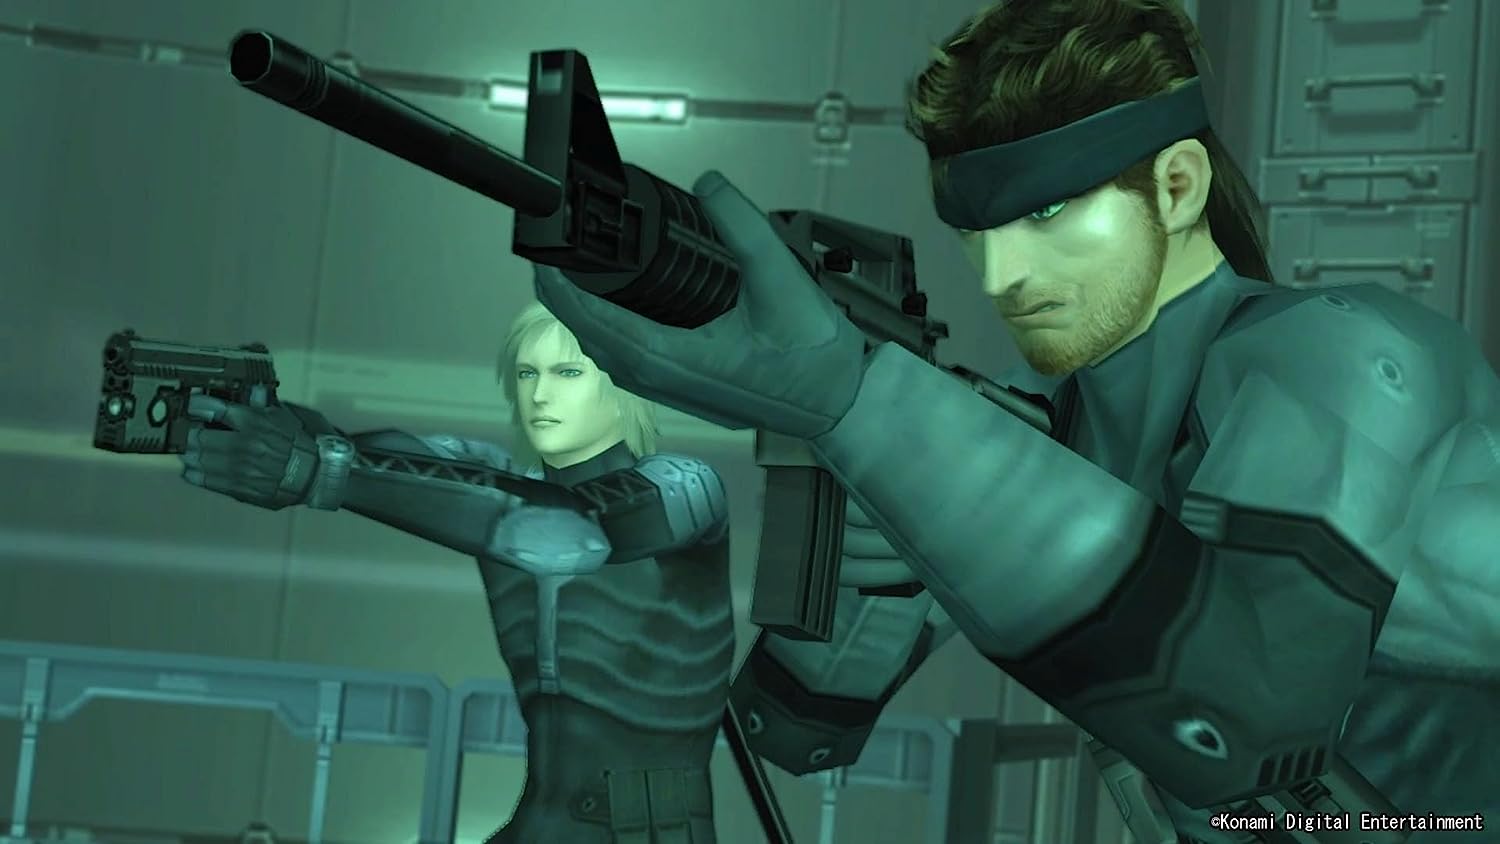 PS5 Metal Gear Solid: Master Collection Vol. 1 (NC16)